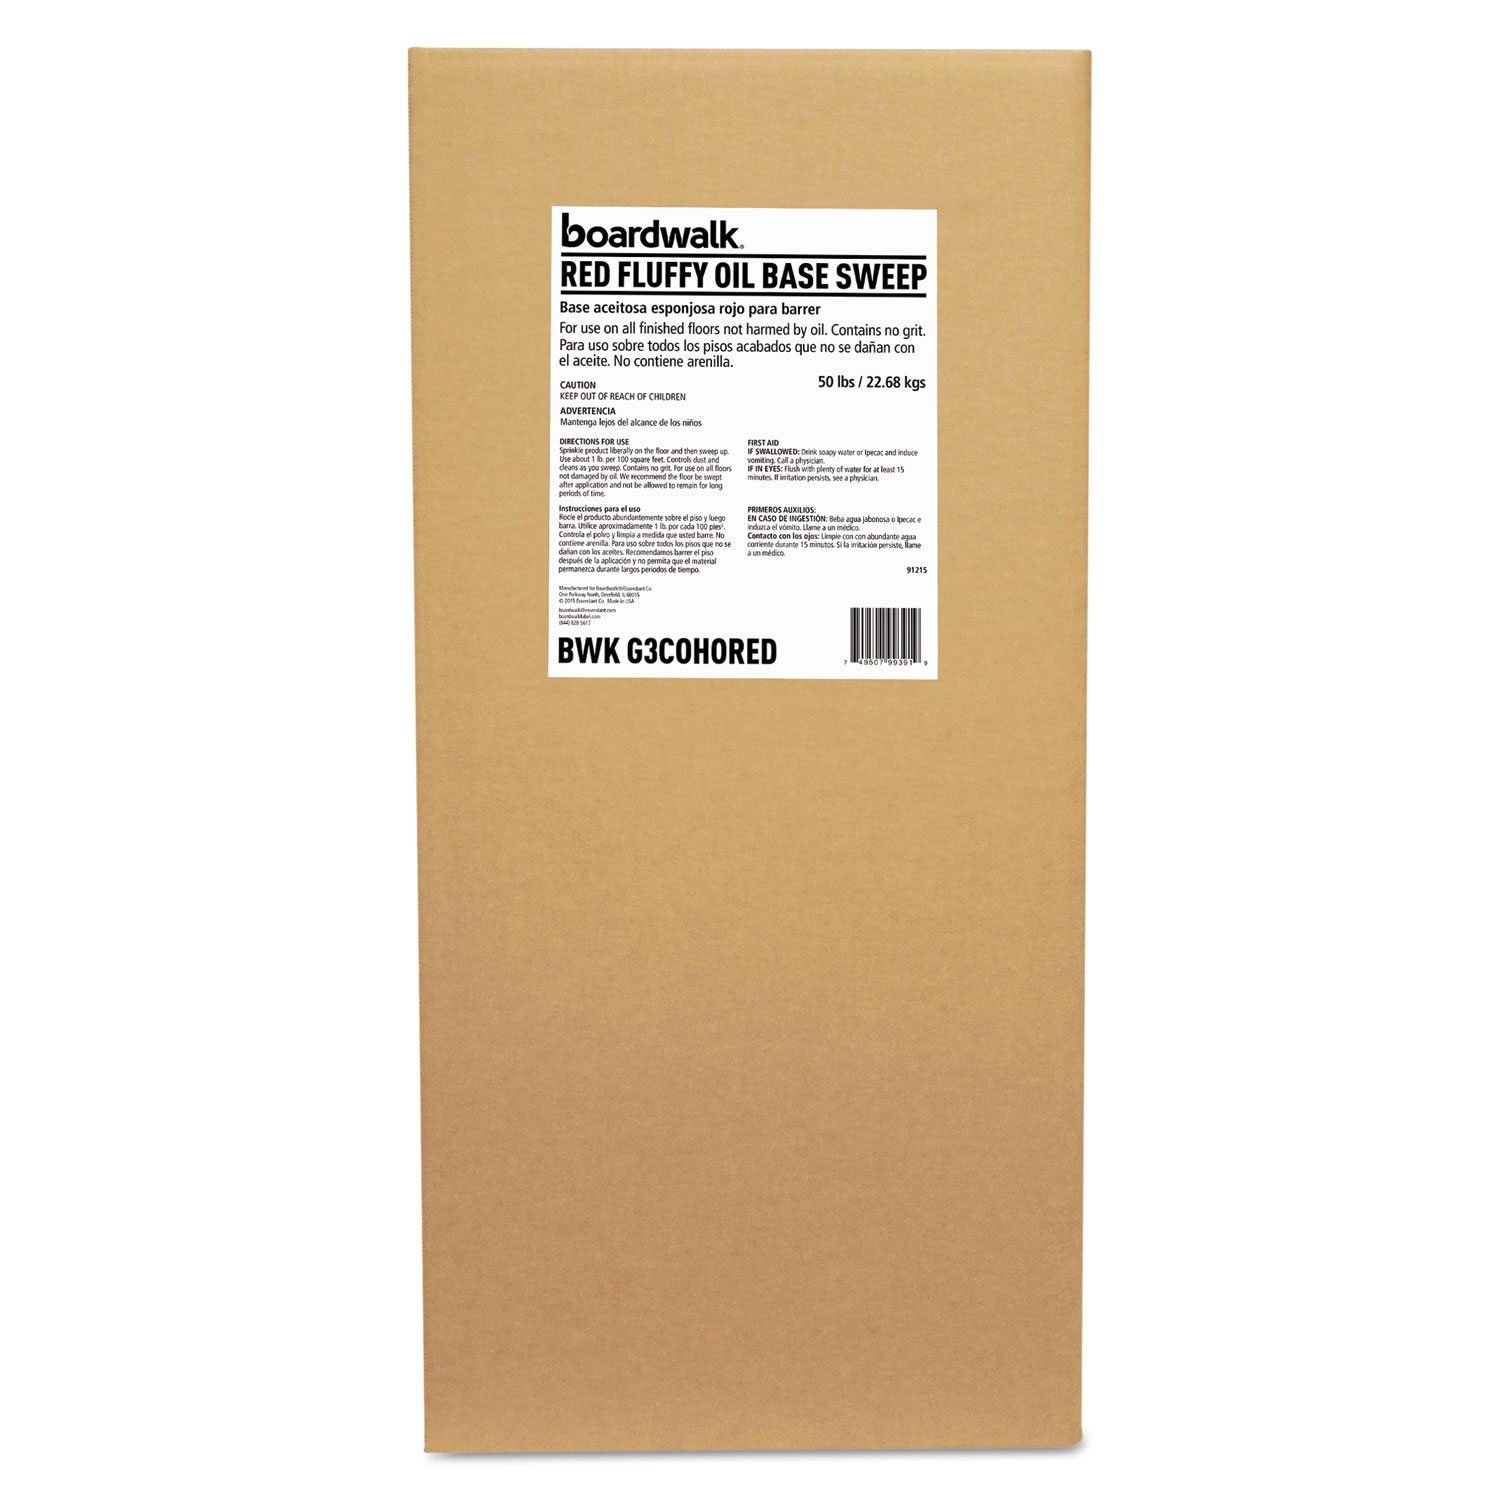  Boardwalk BWKG3COHORED Oil-Based Sweeping Compound, Grit-Free, Red, 50lbs, Box (BWKG3COHORED) 